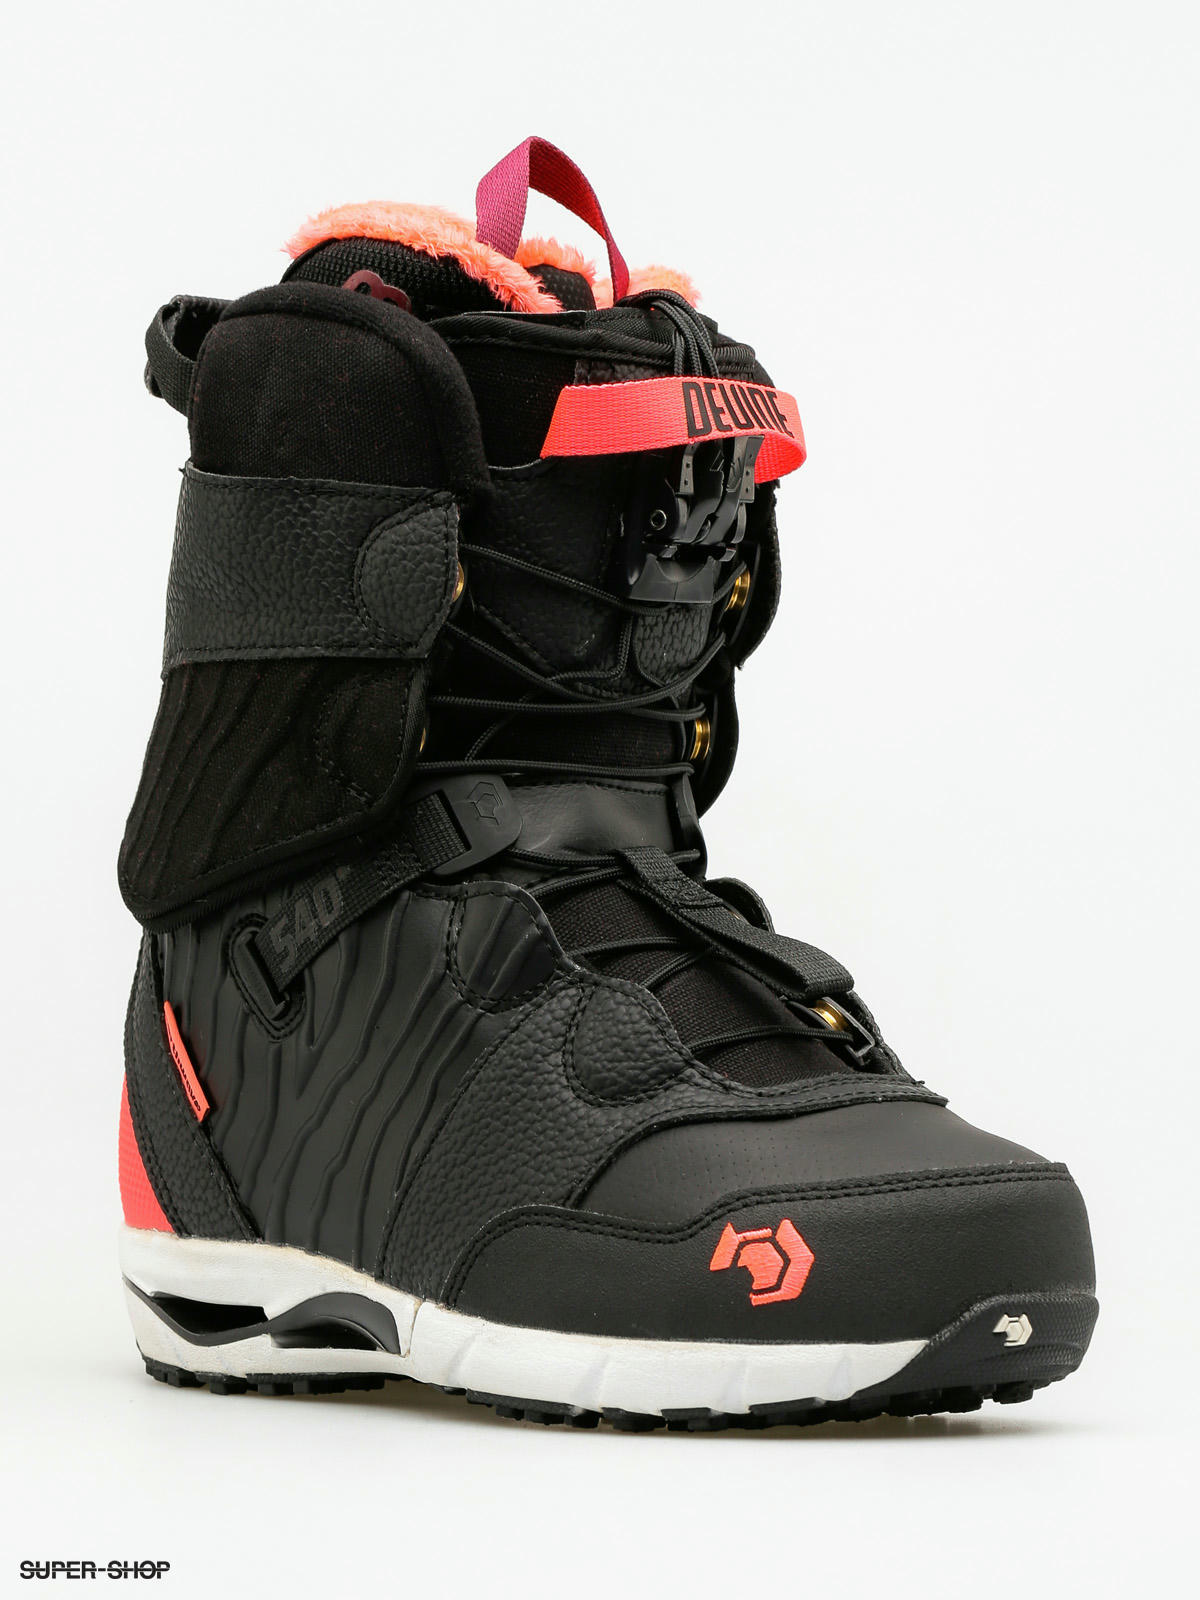 snowboard shoes